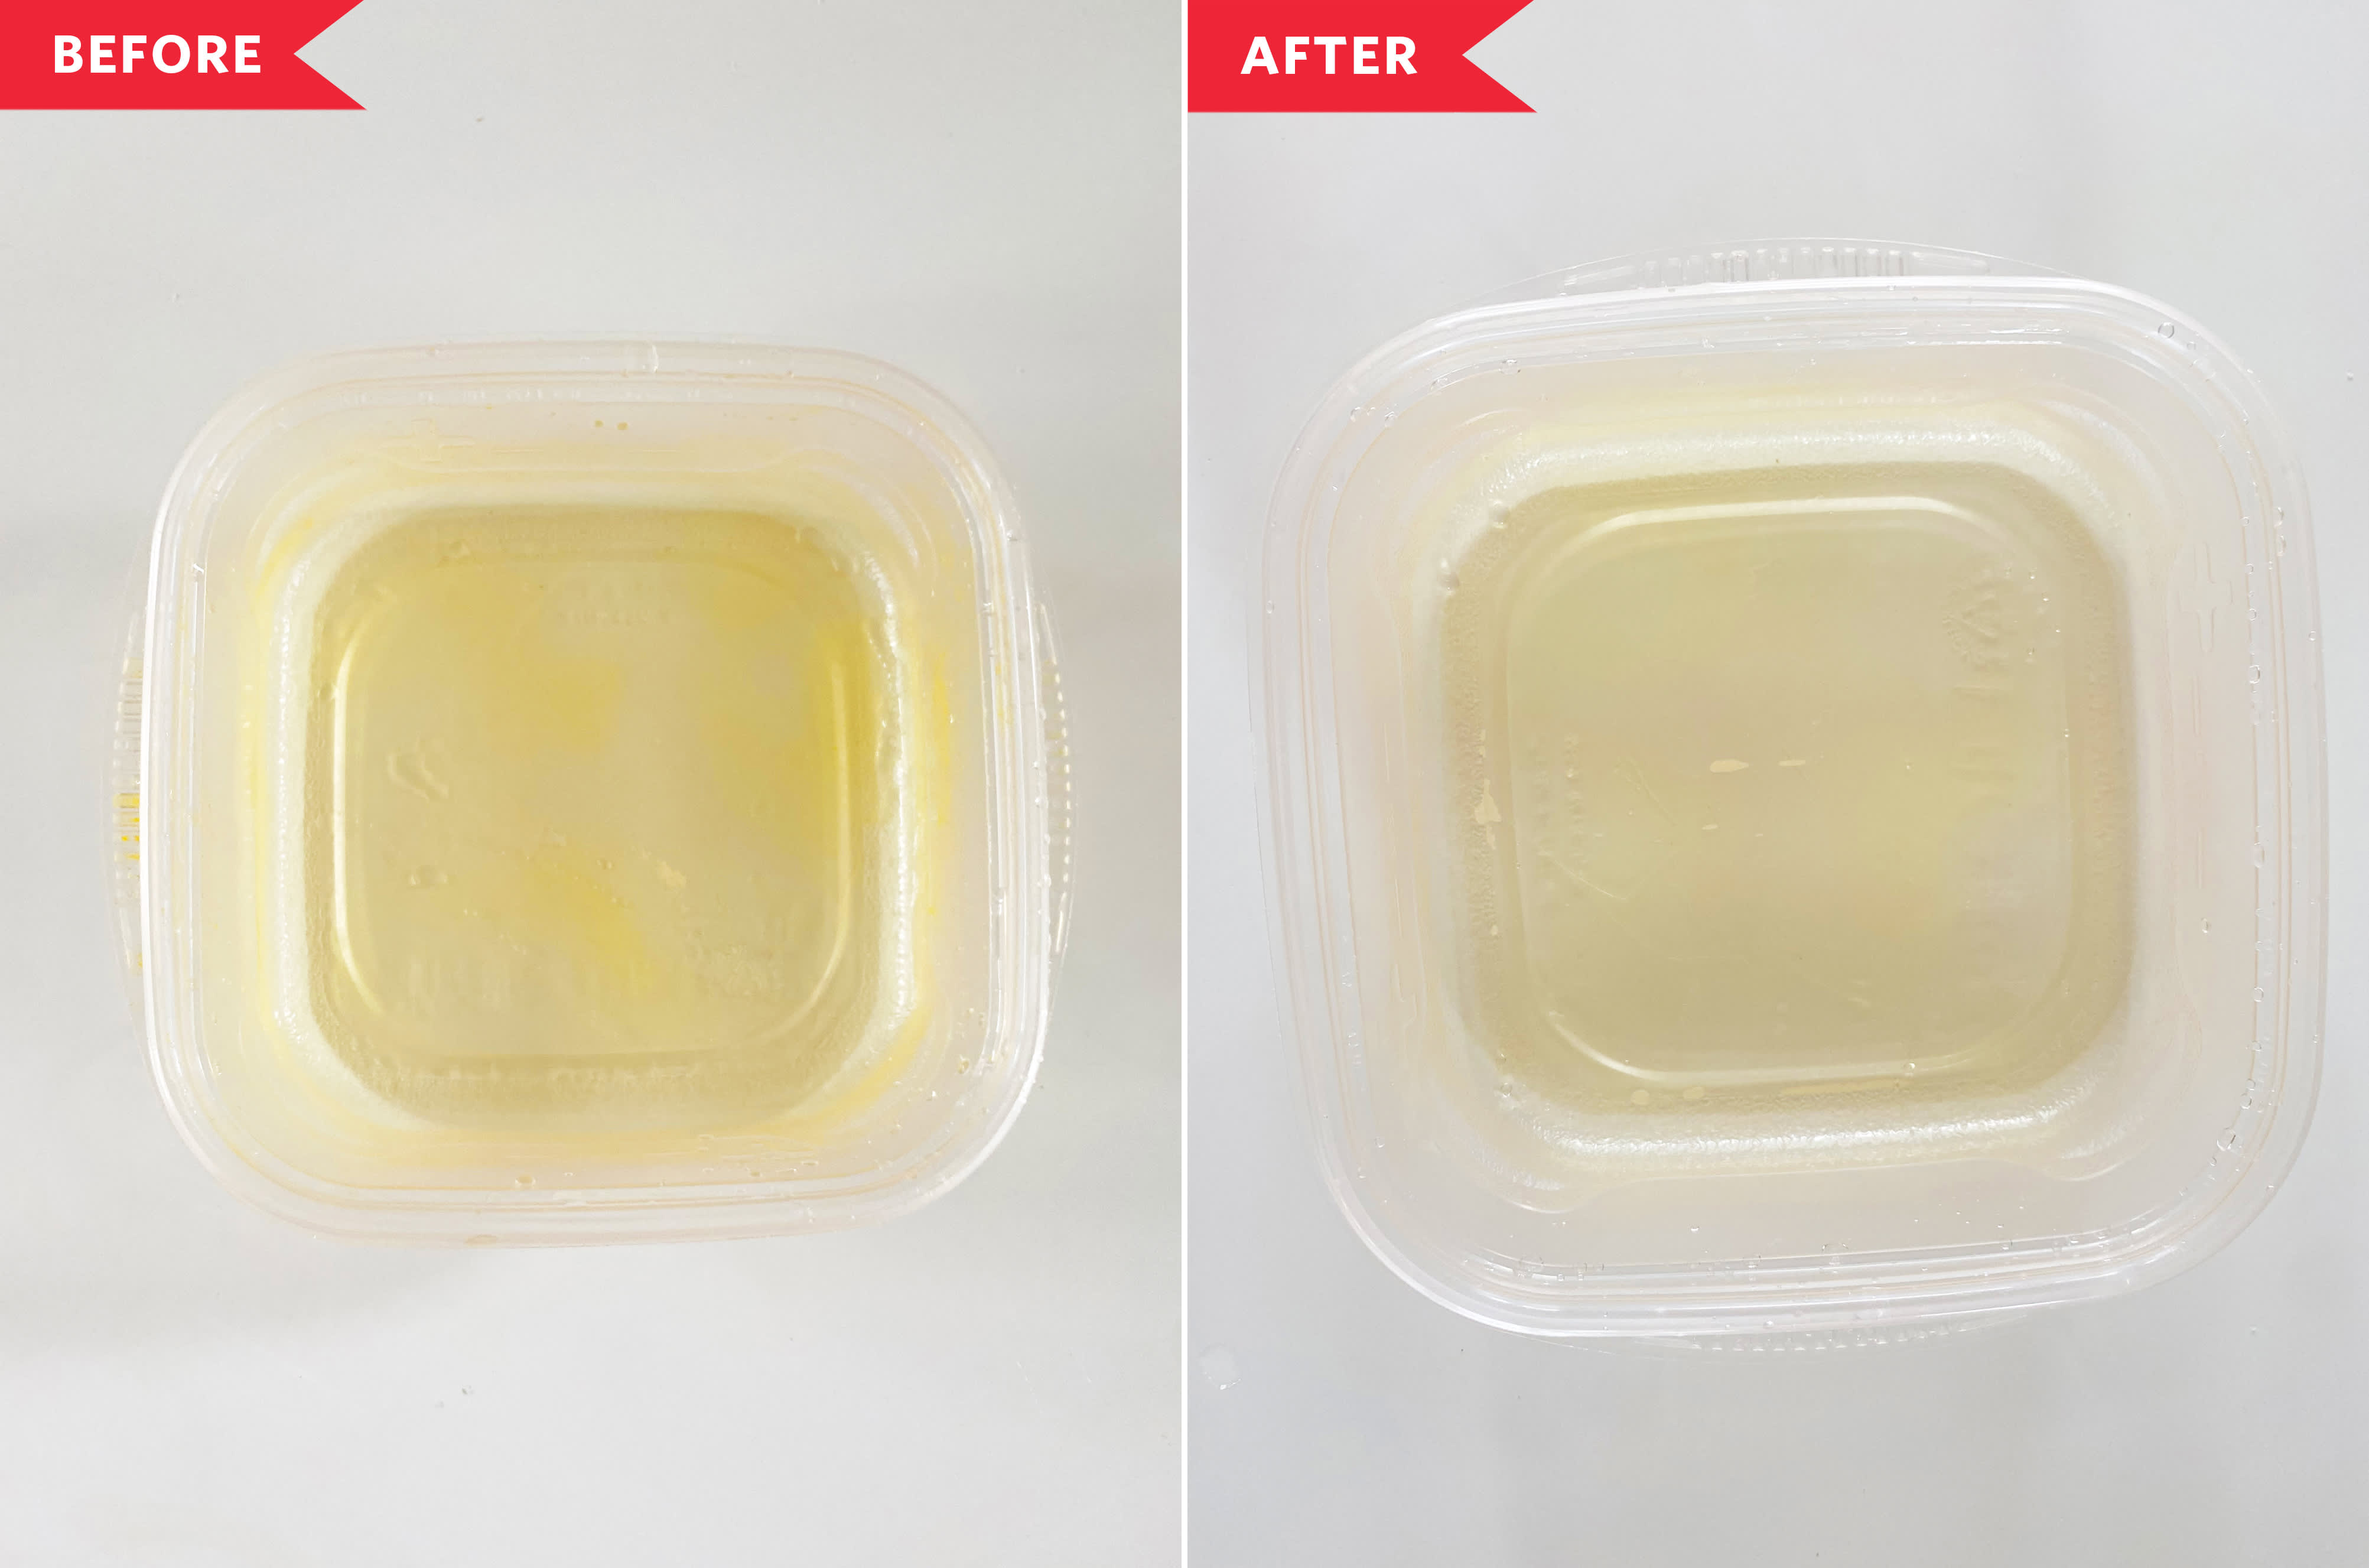 https://cdn.apartmenttherapy.info/image/upload/v1598376618/at/organize-clean/tiktok-tupperware-hack-before-and-after.jpg